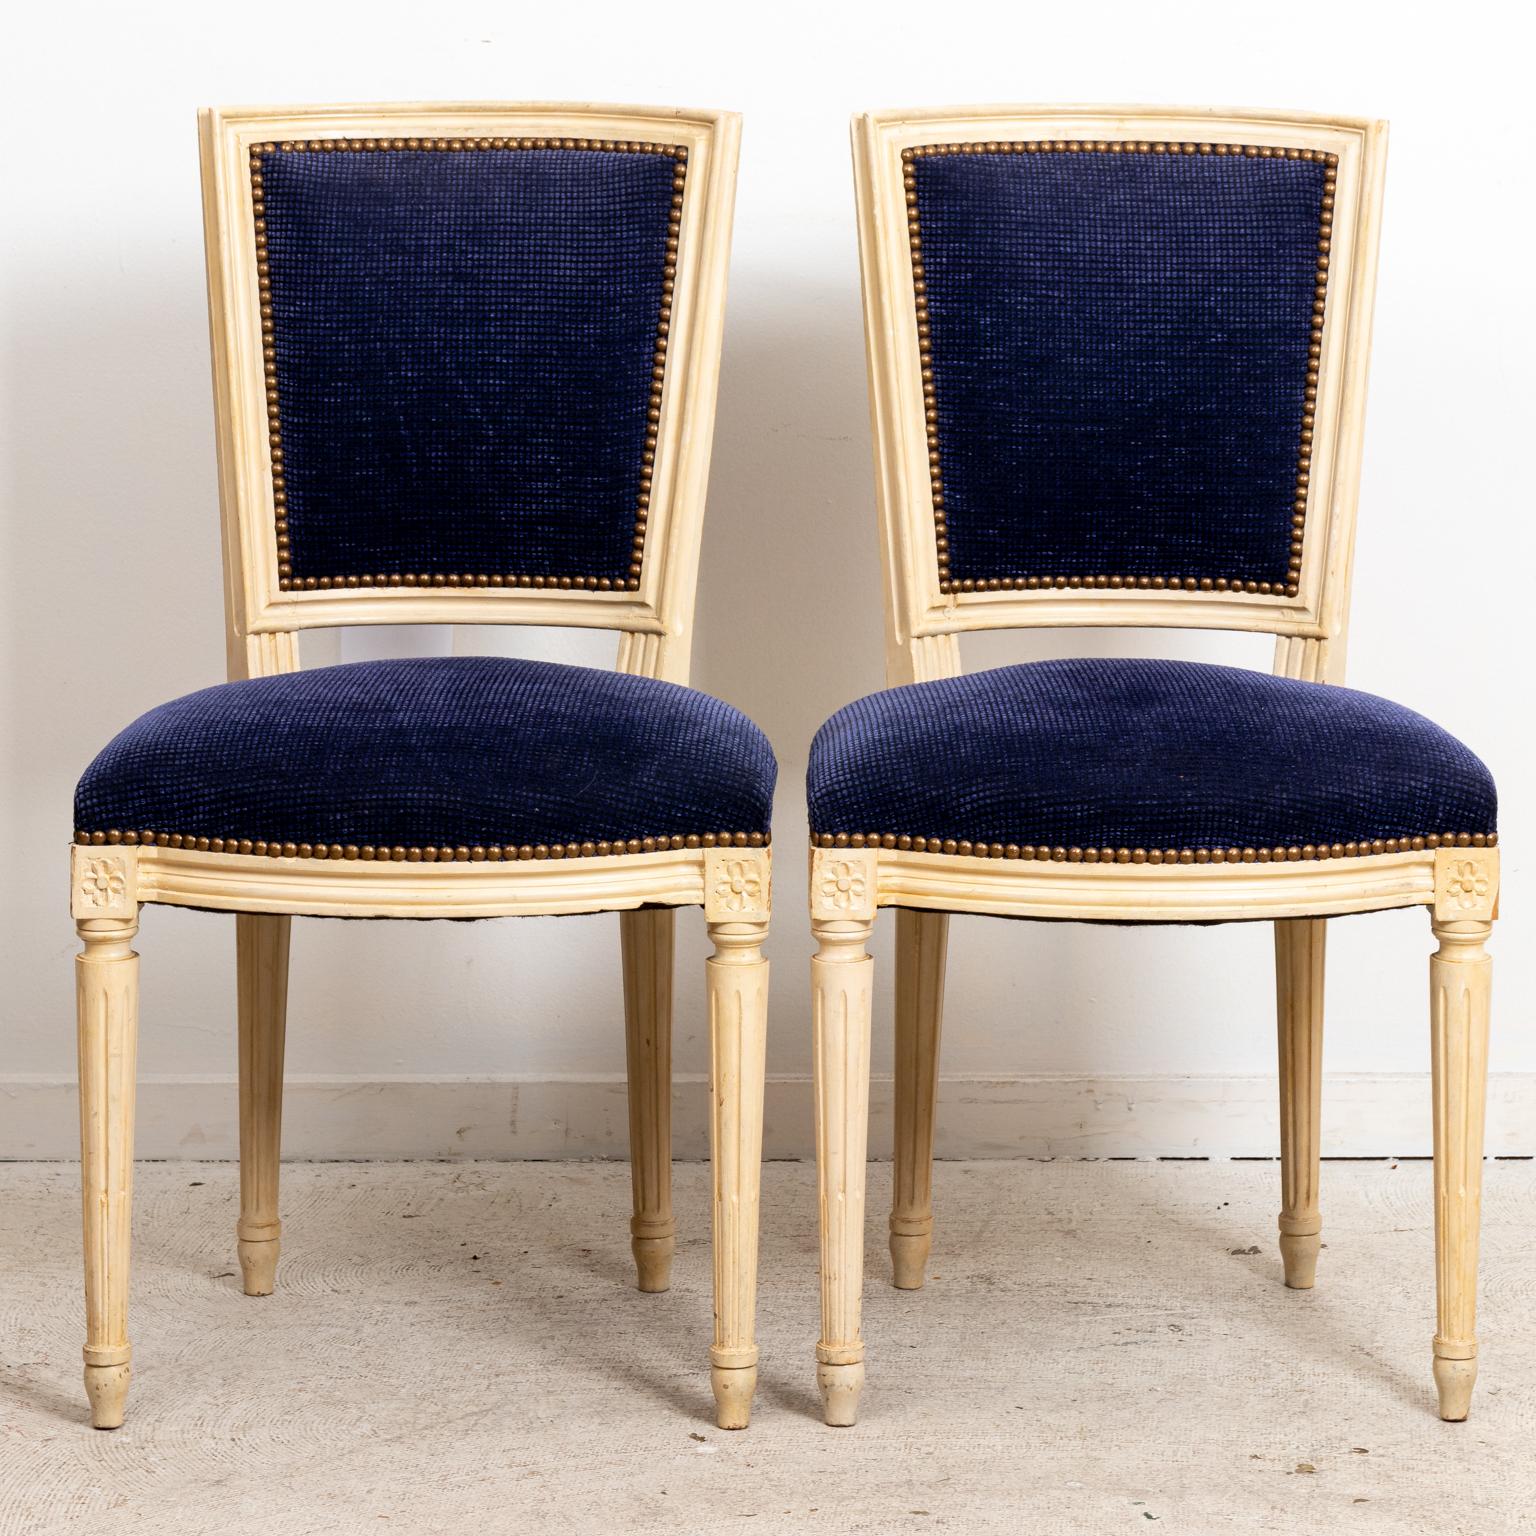 Circa 1940s pair of French Louis XVI style chairs with upholstered seat back and seat. The chair also features metal nail head trim and turned, fluted legs. Please note of wear consistent with age.